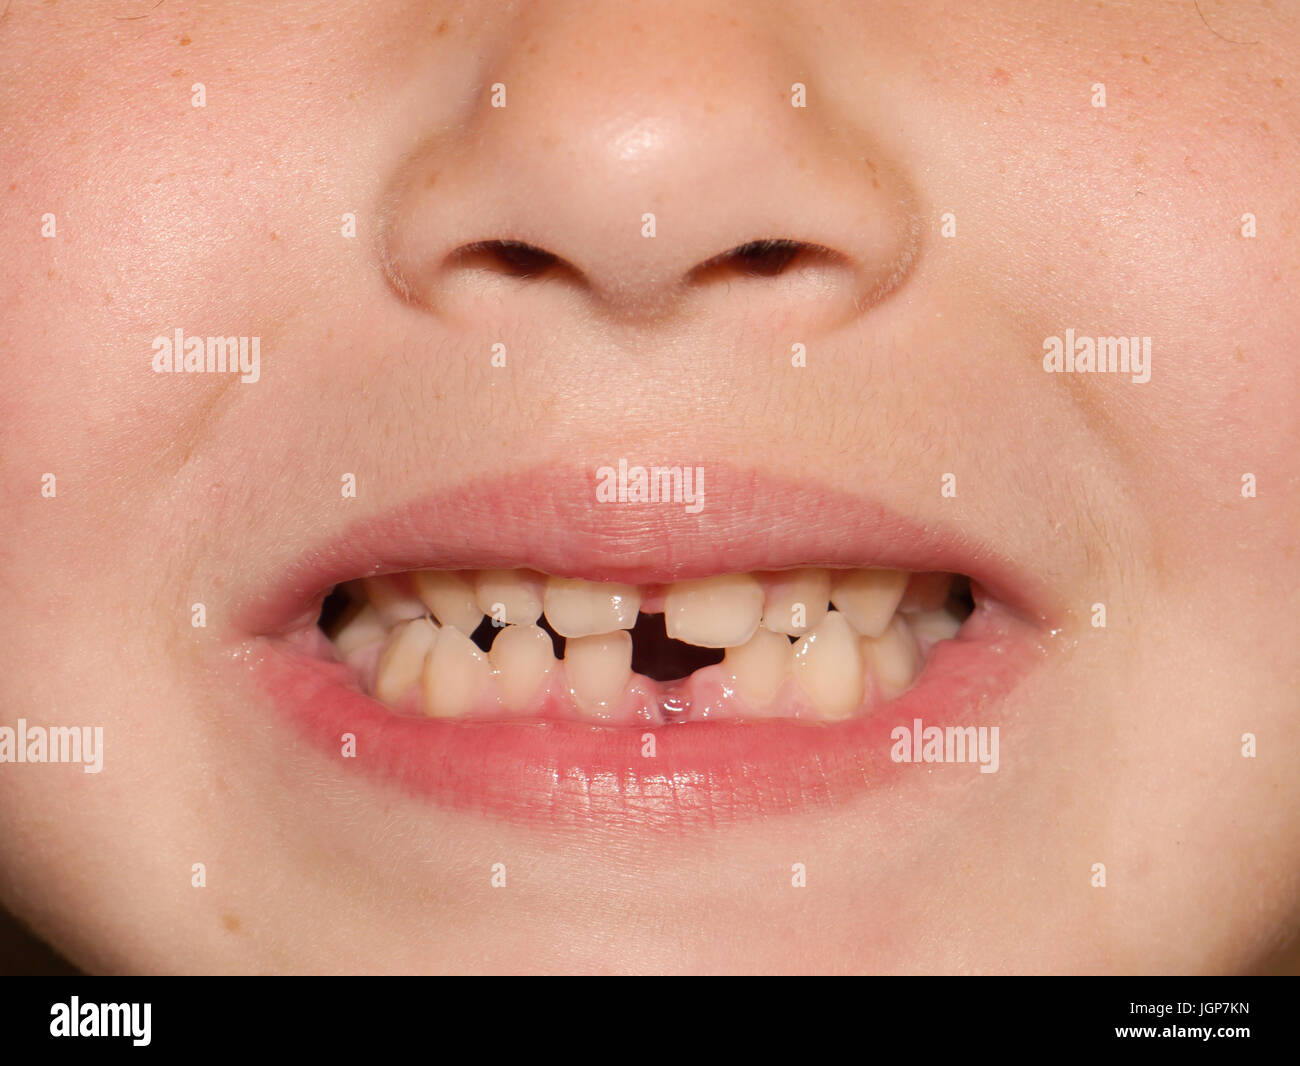 A close up of the moth of a young child with missing teeth Stock Photo